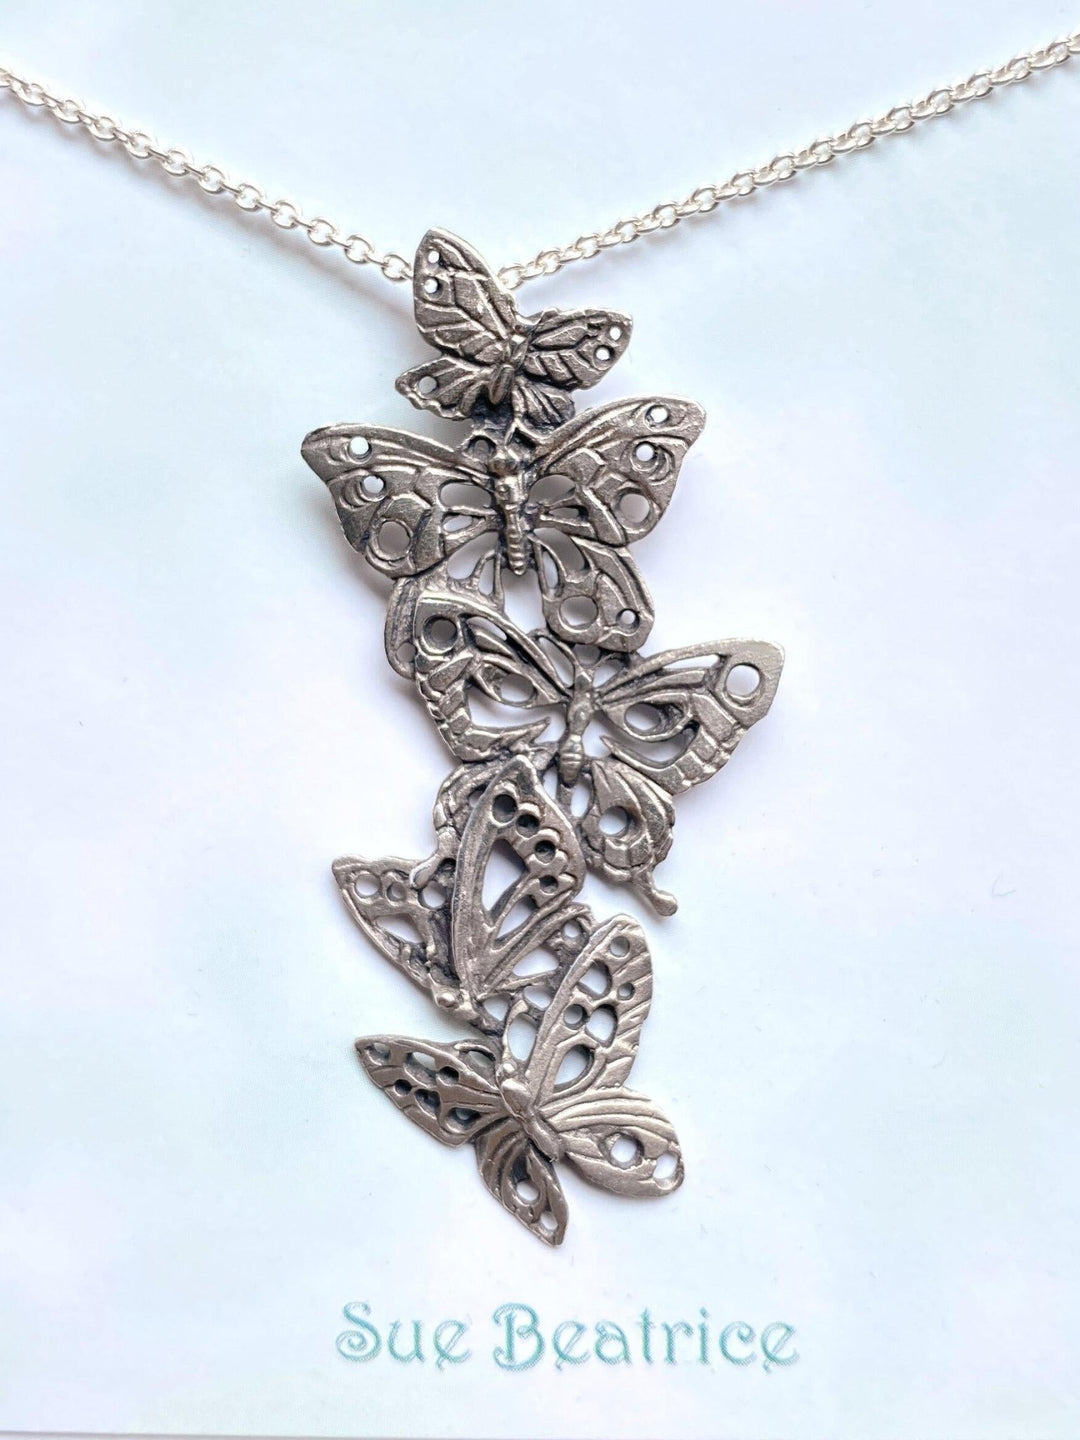 A solid sterling silver necklace with five ascending butterflies hanging from the center of a display card. The butterflies are arranged in a filigree design and the necklace is suspended from a sterling silver chain. The display card is square with a light blue cloudy background with Sue Beatrice written underneath.  The item is well-lit and centered on the card.